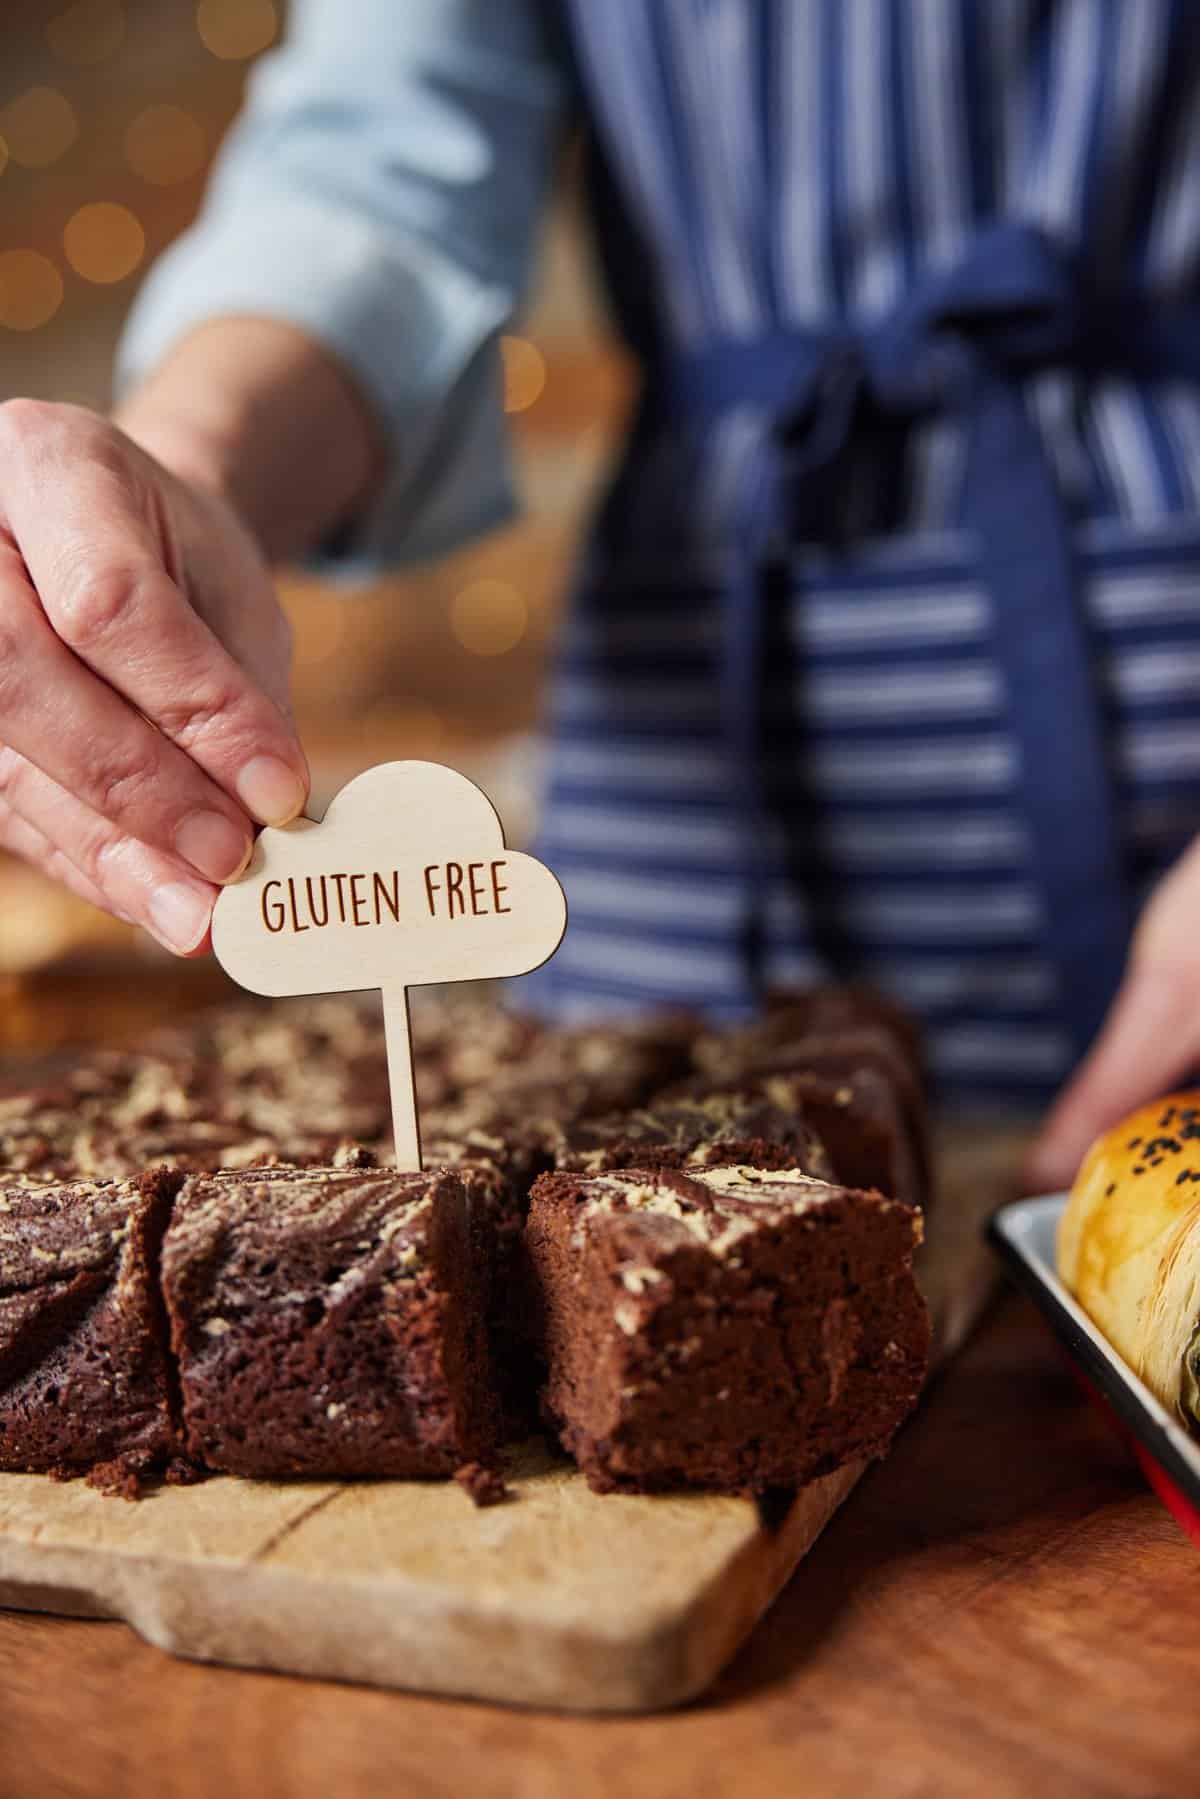 A sign with the text "gluten free" being set down in a piece of cake.